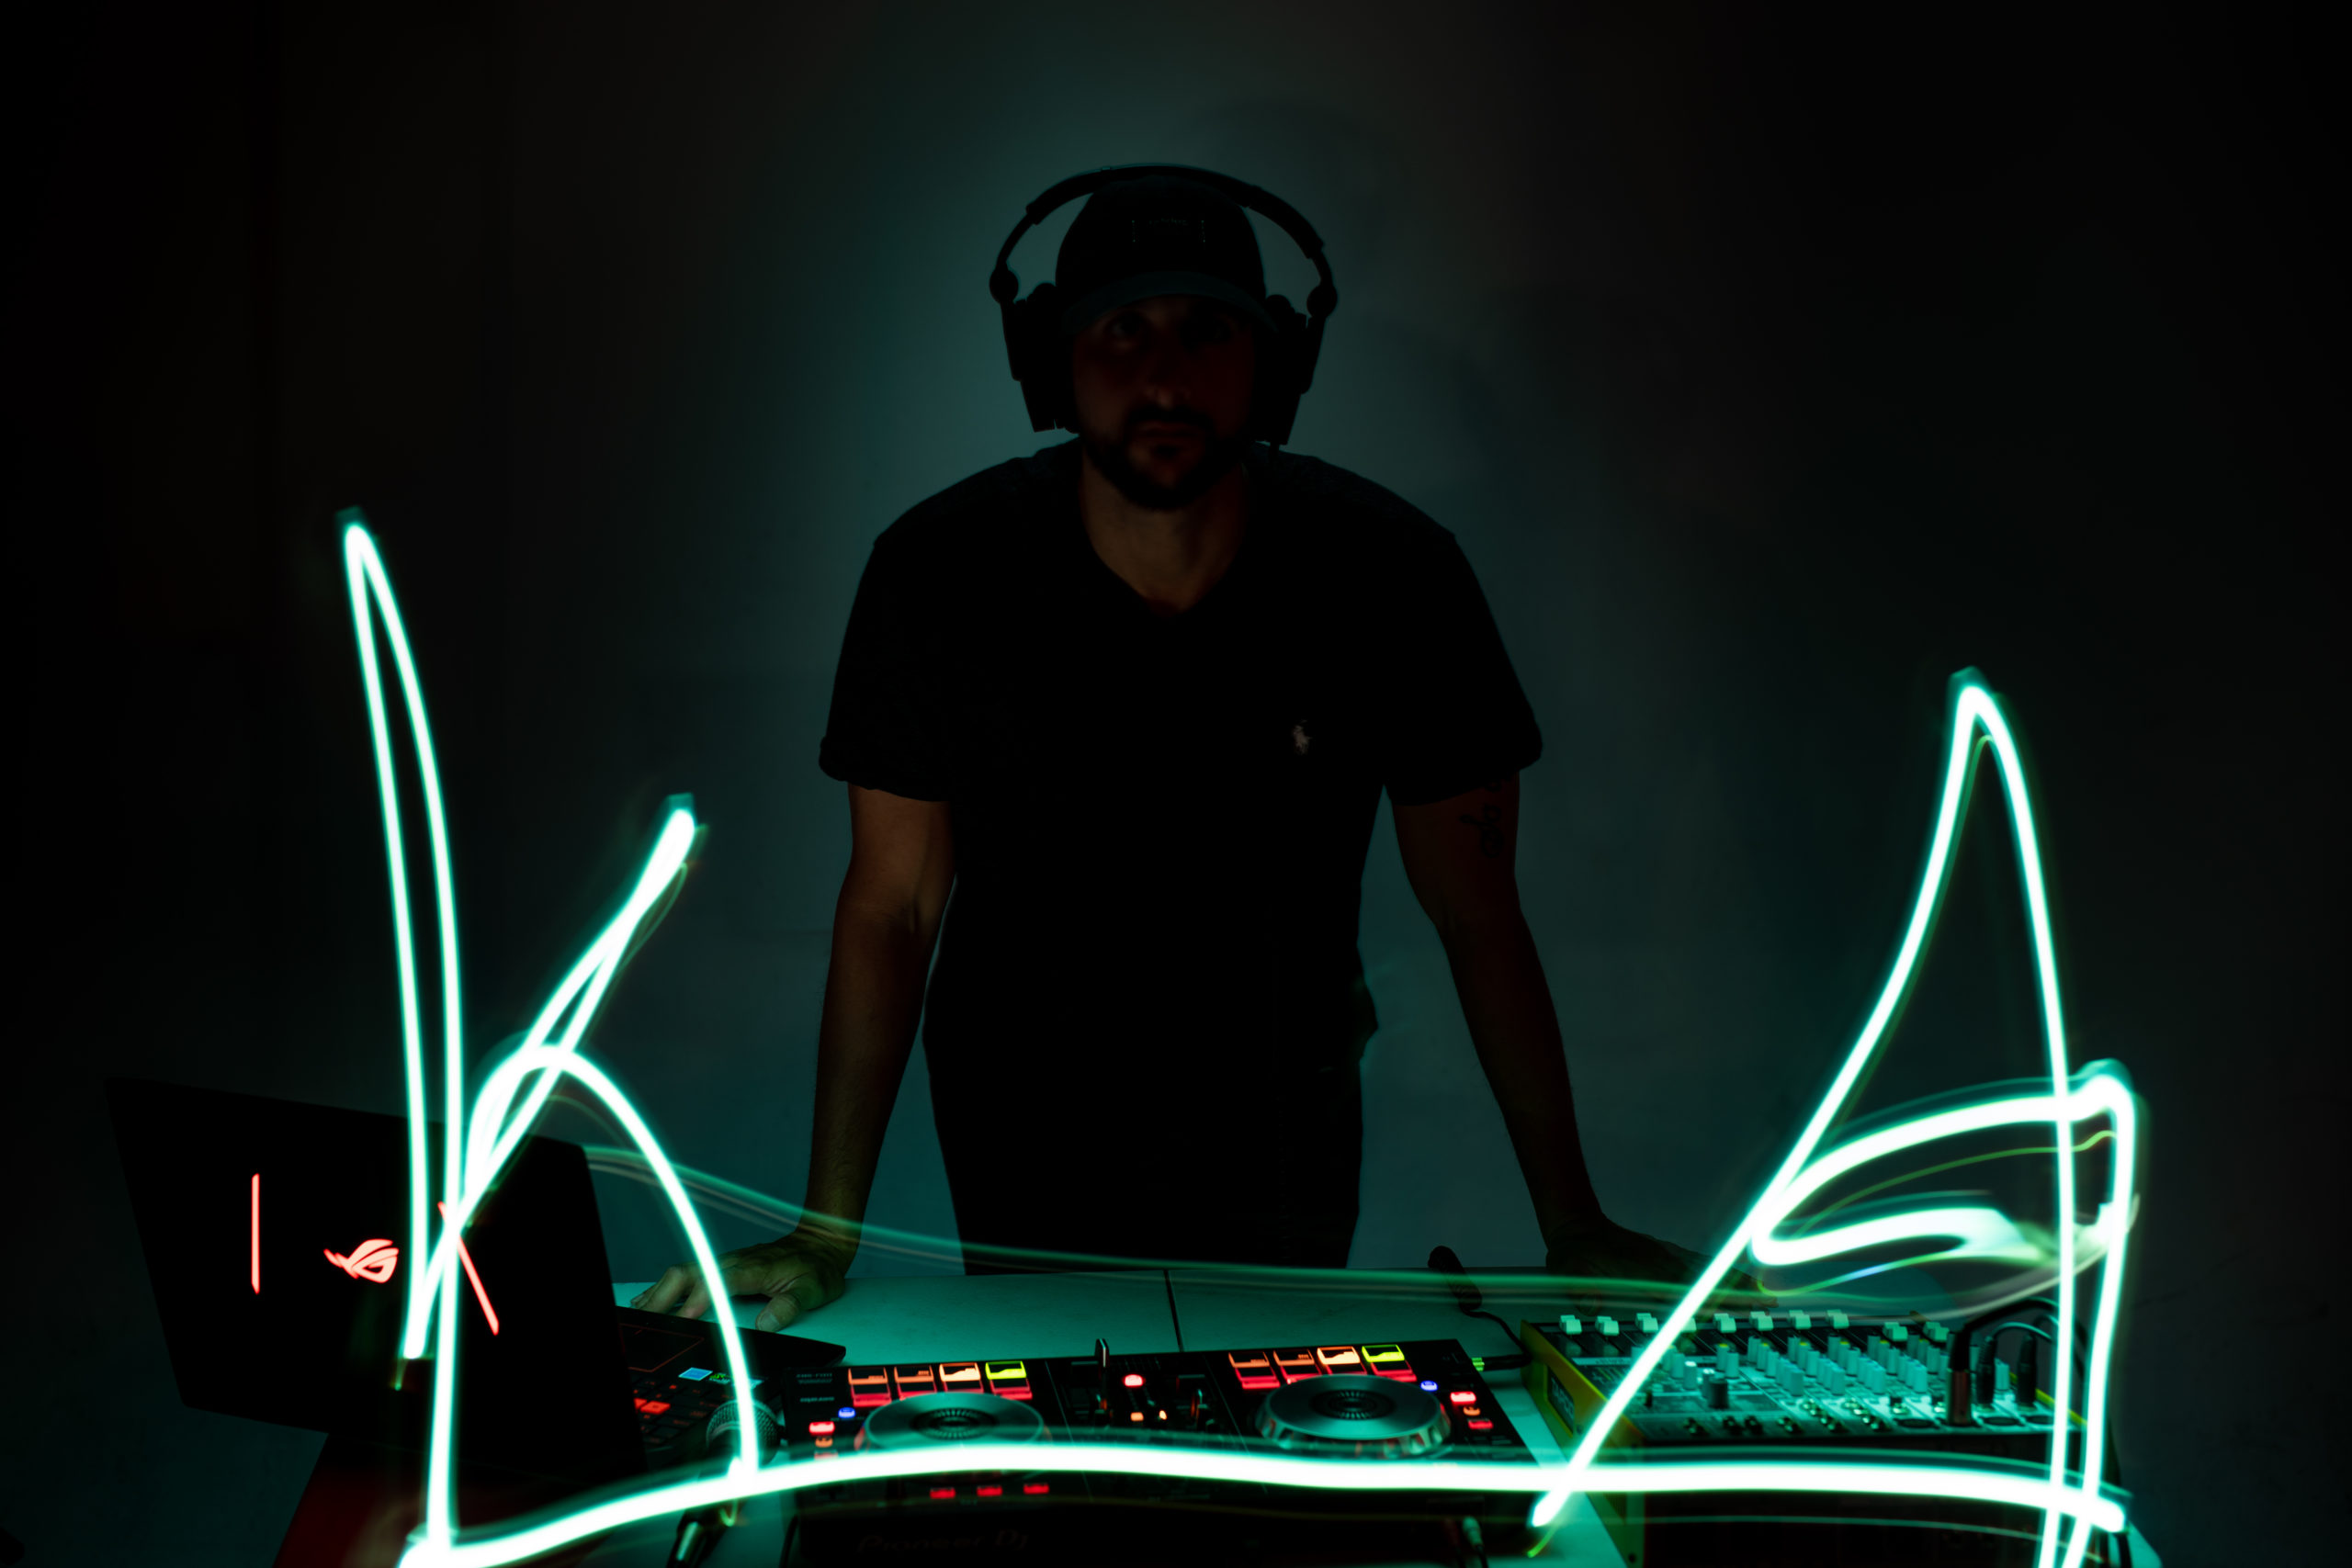 Man standing with black hat, beard and clothes looking towards camera behind a DJ machine with green neon lights. He is wearing headphones.